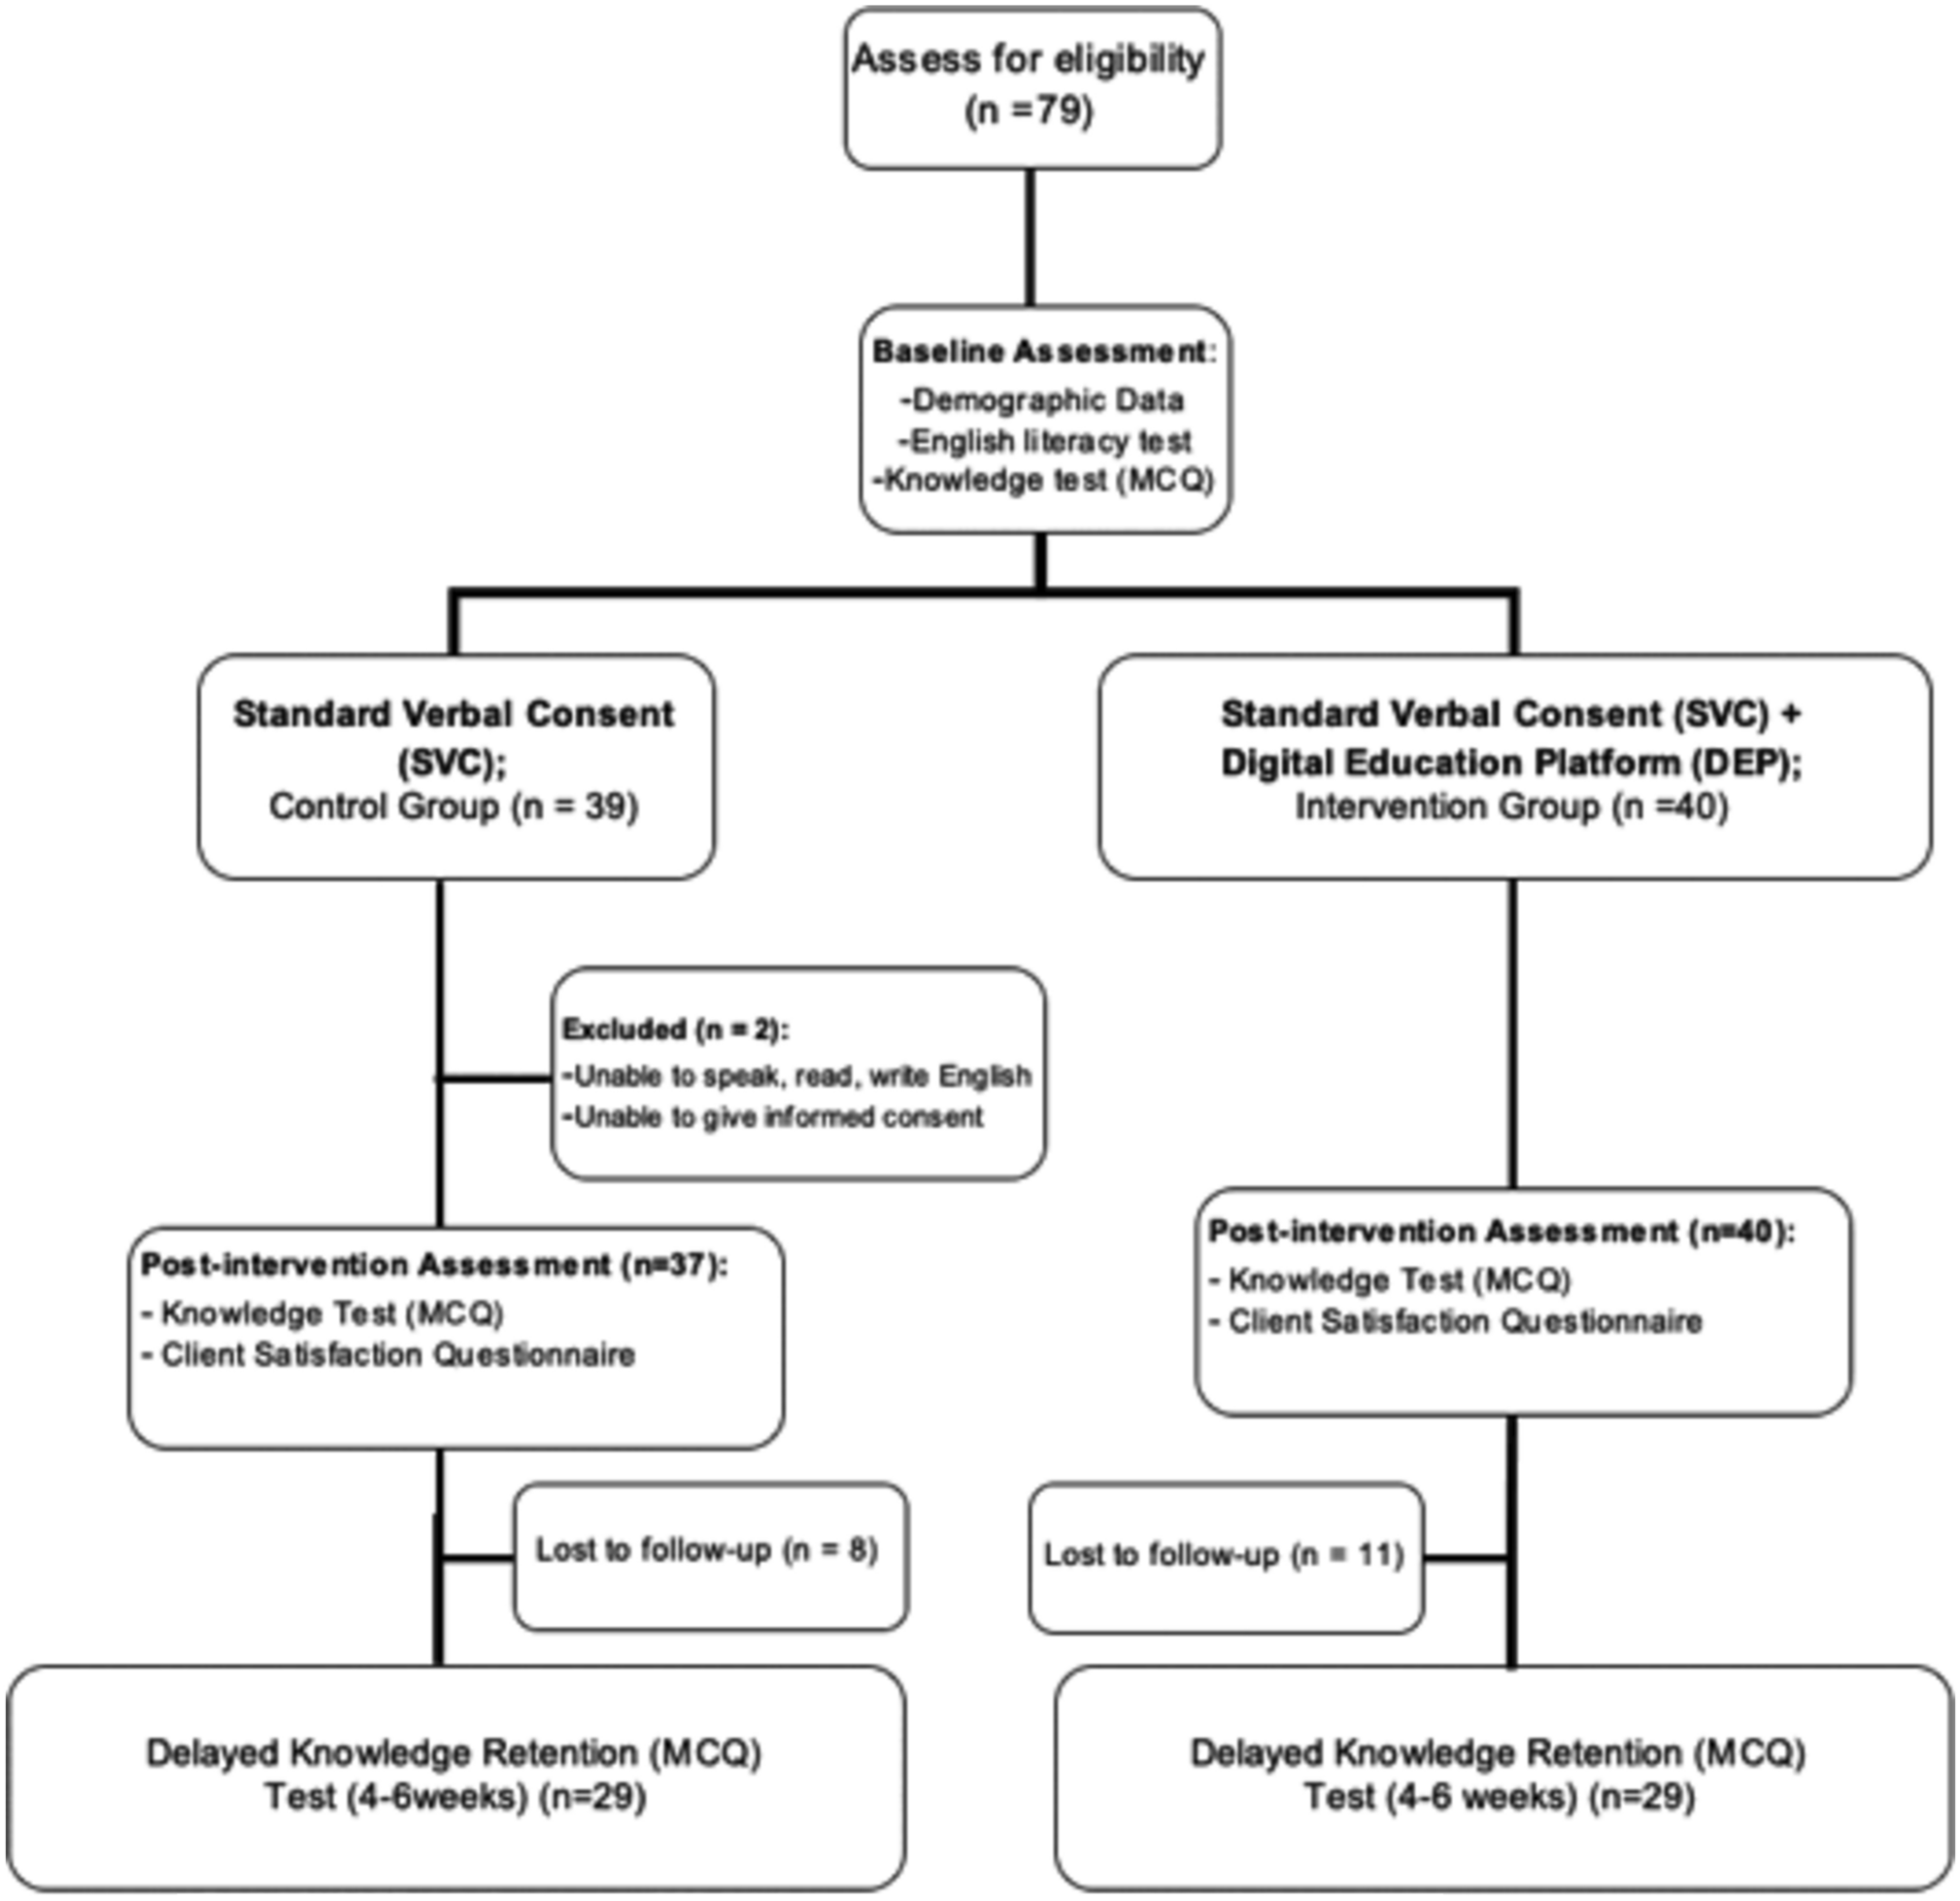 Optimizing the consent process for emergent laparoscopic cholecystectomy using an interactive digital education platform: a randomized control trial